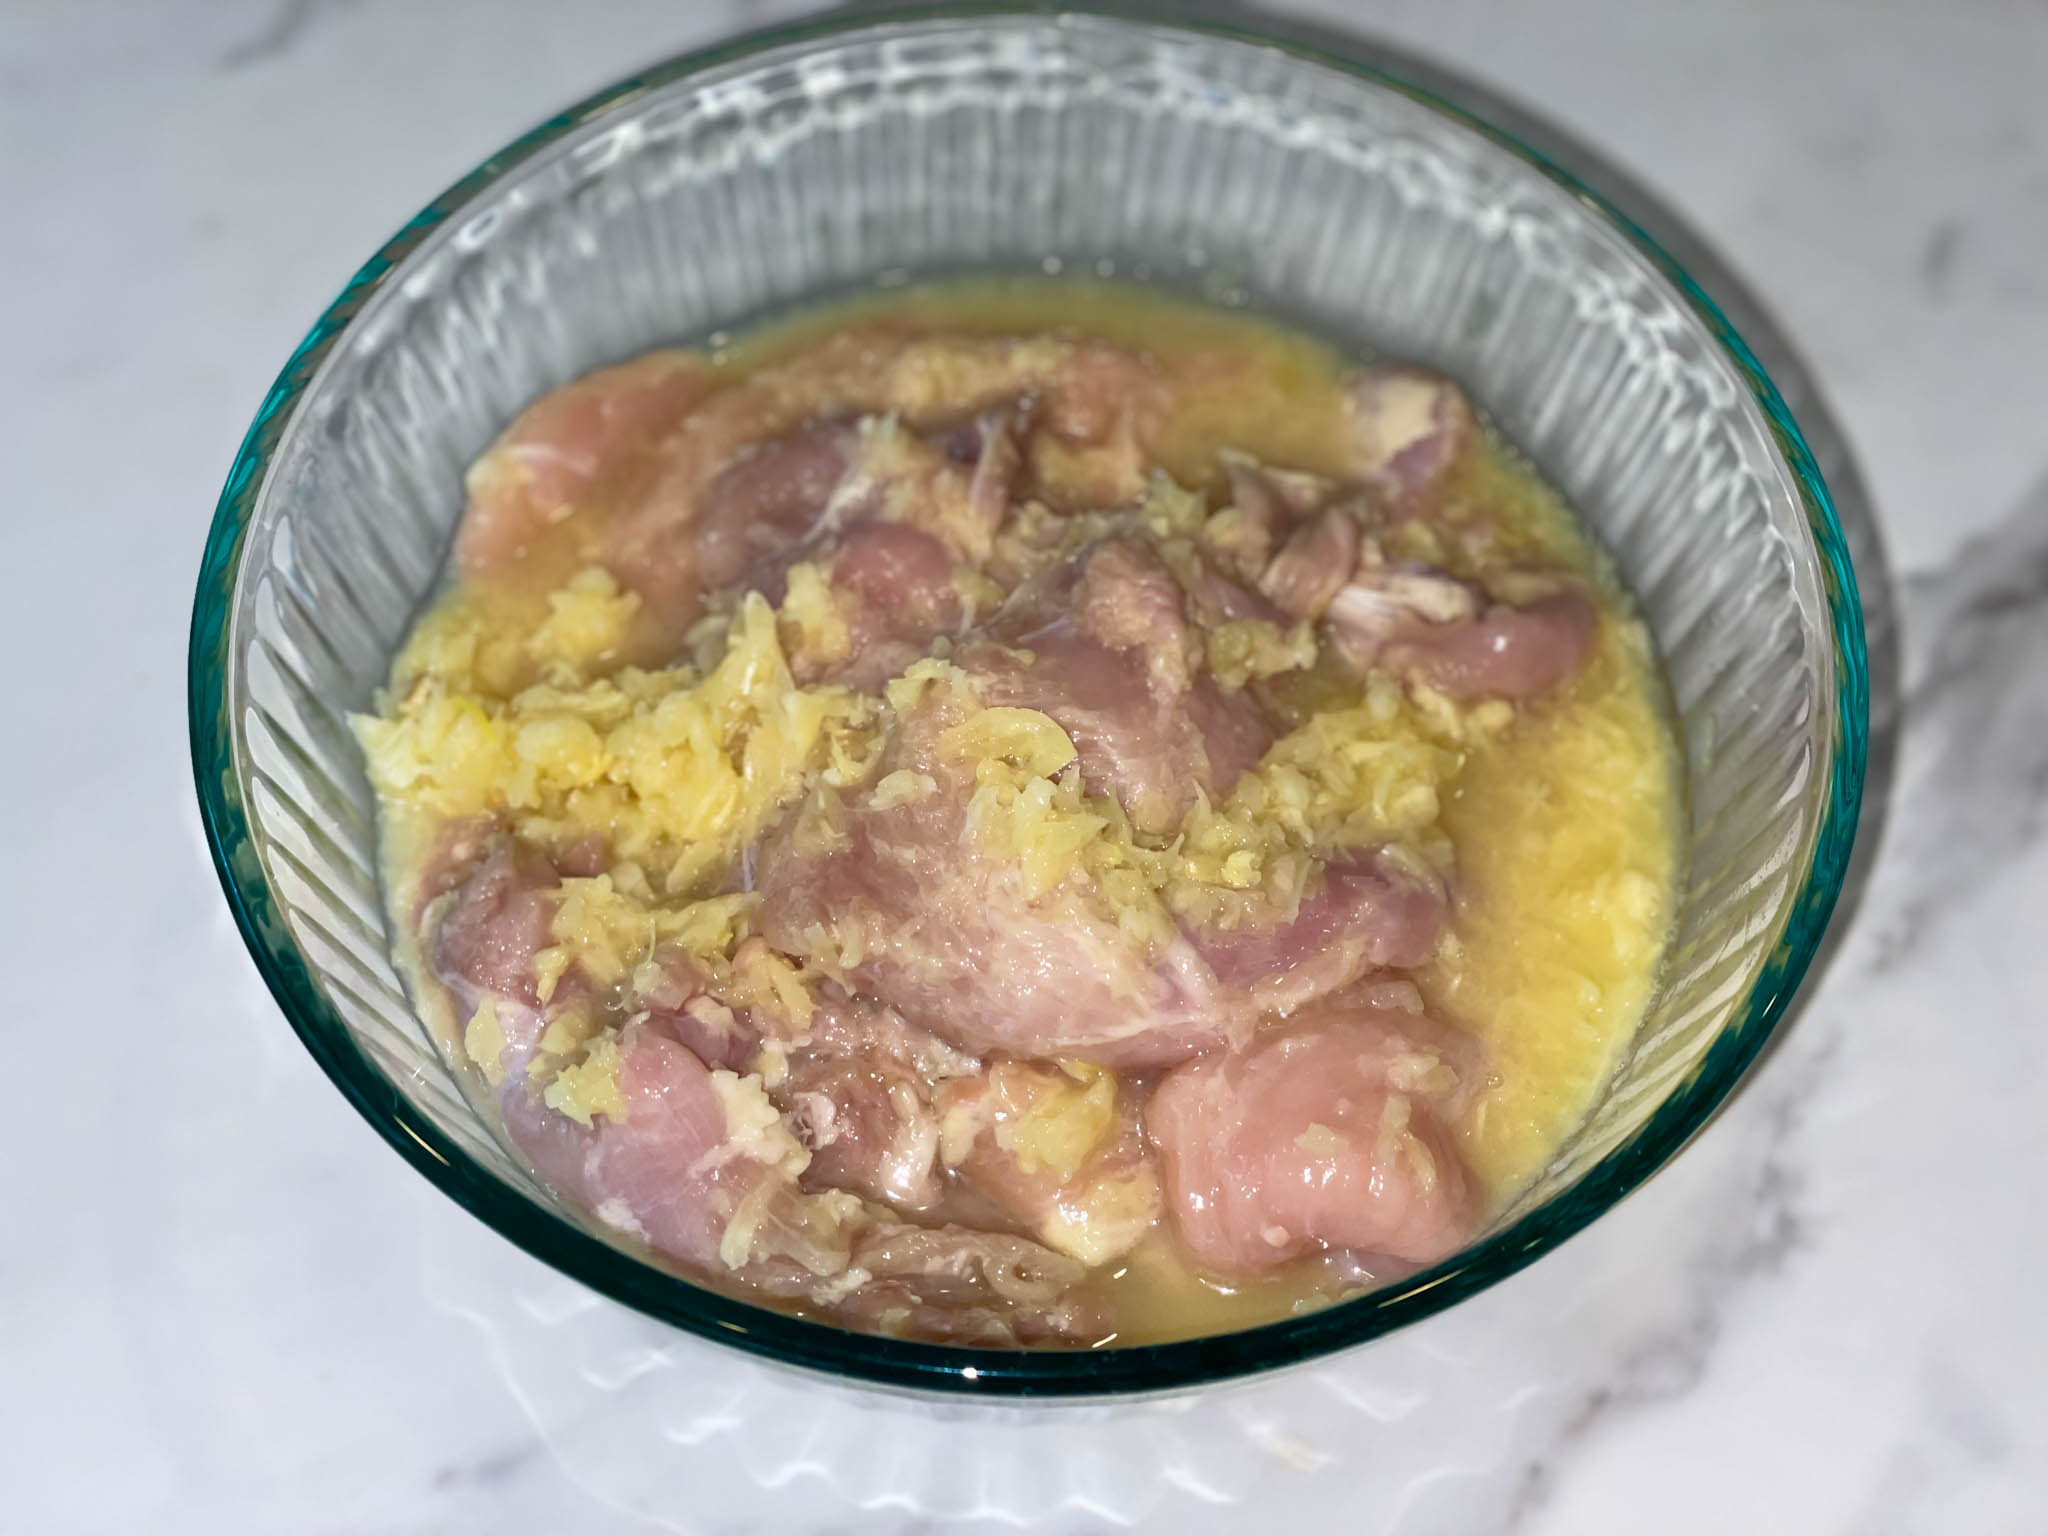 Raw chicken breast marinating in naranja agria, lime juice and garlic in a glass bowl on a white background.